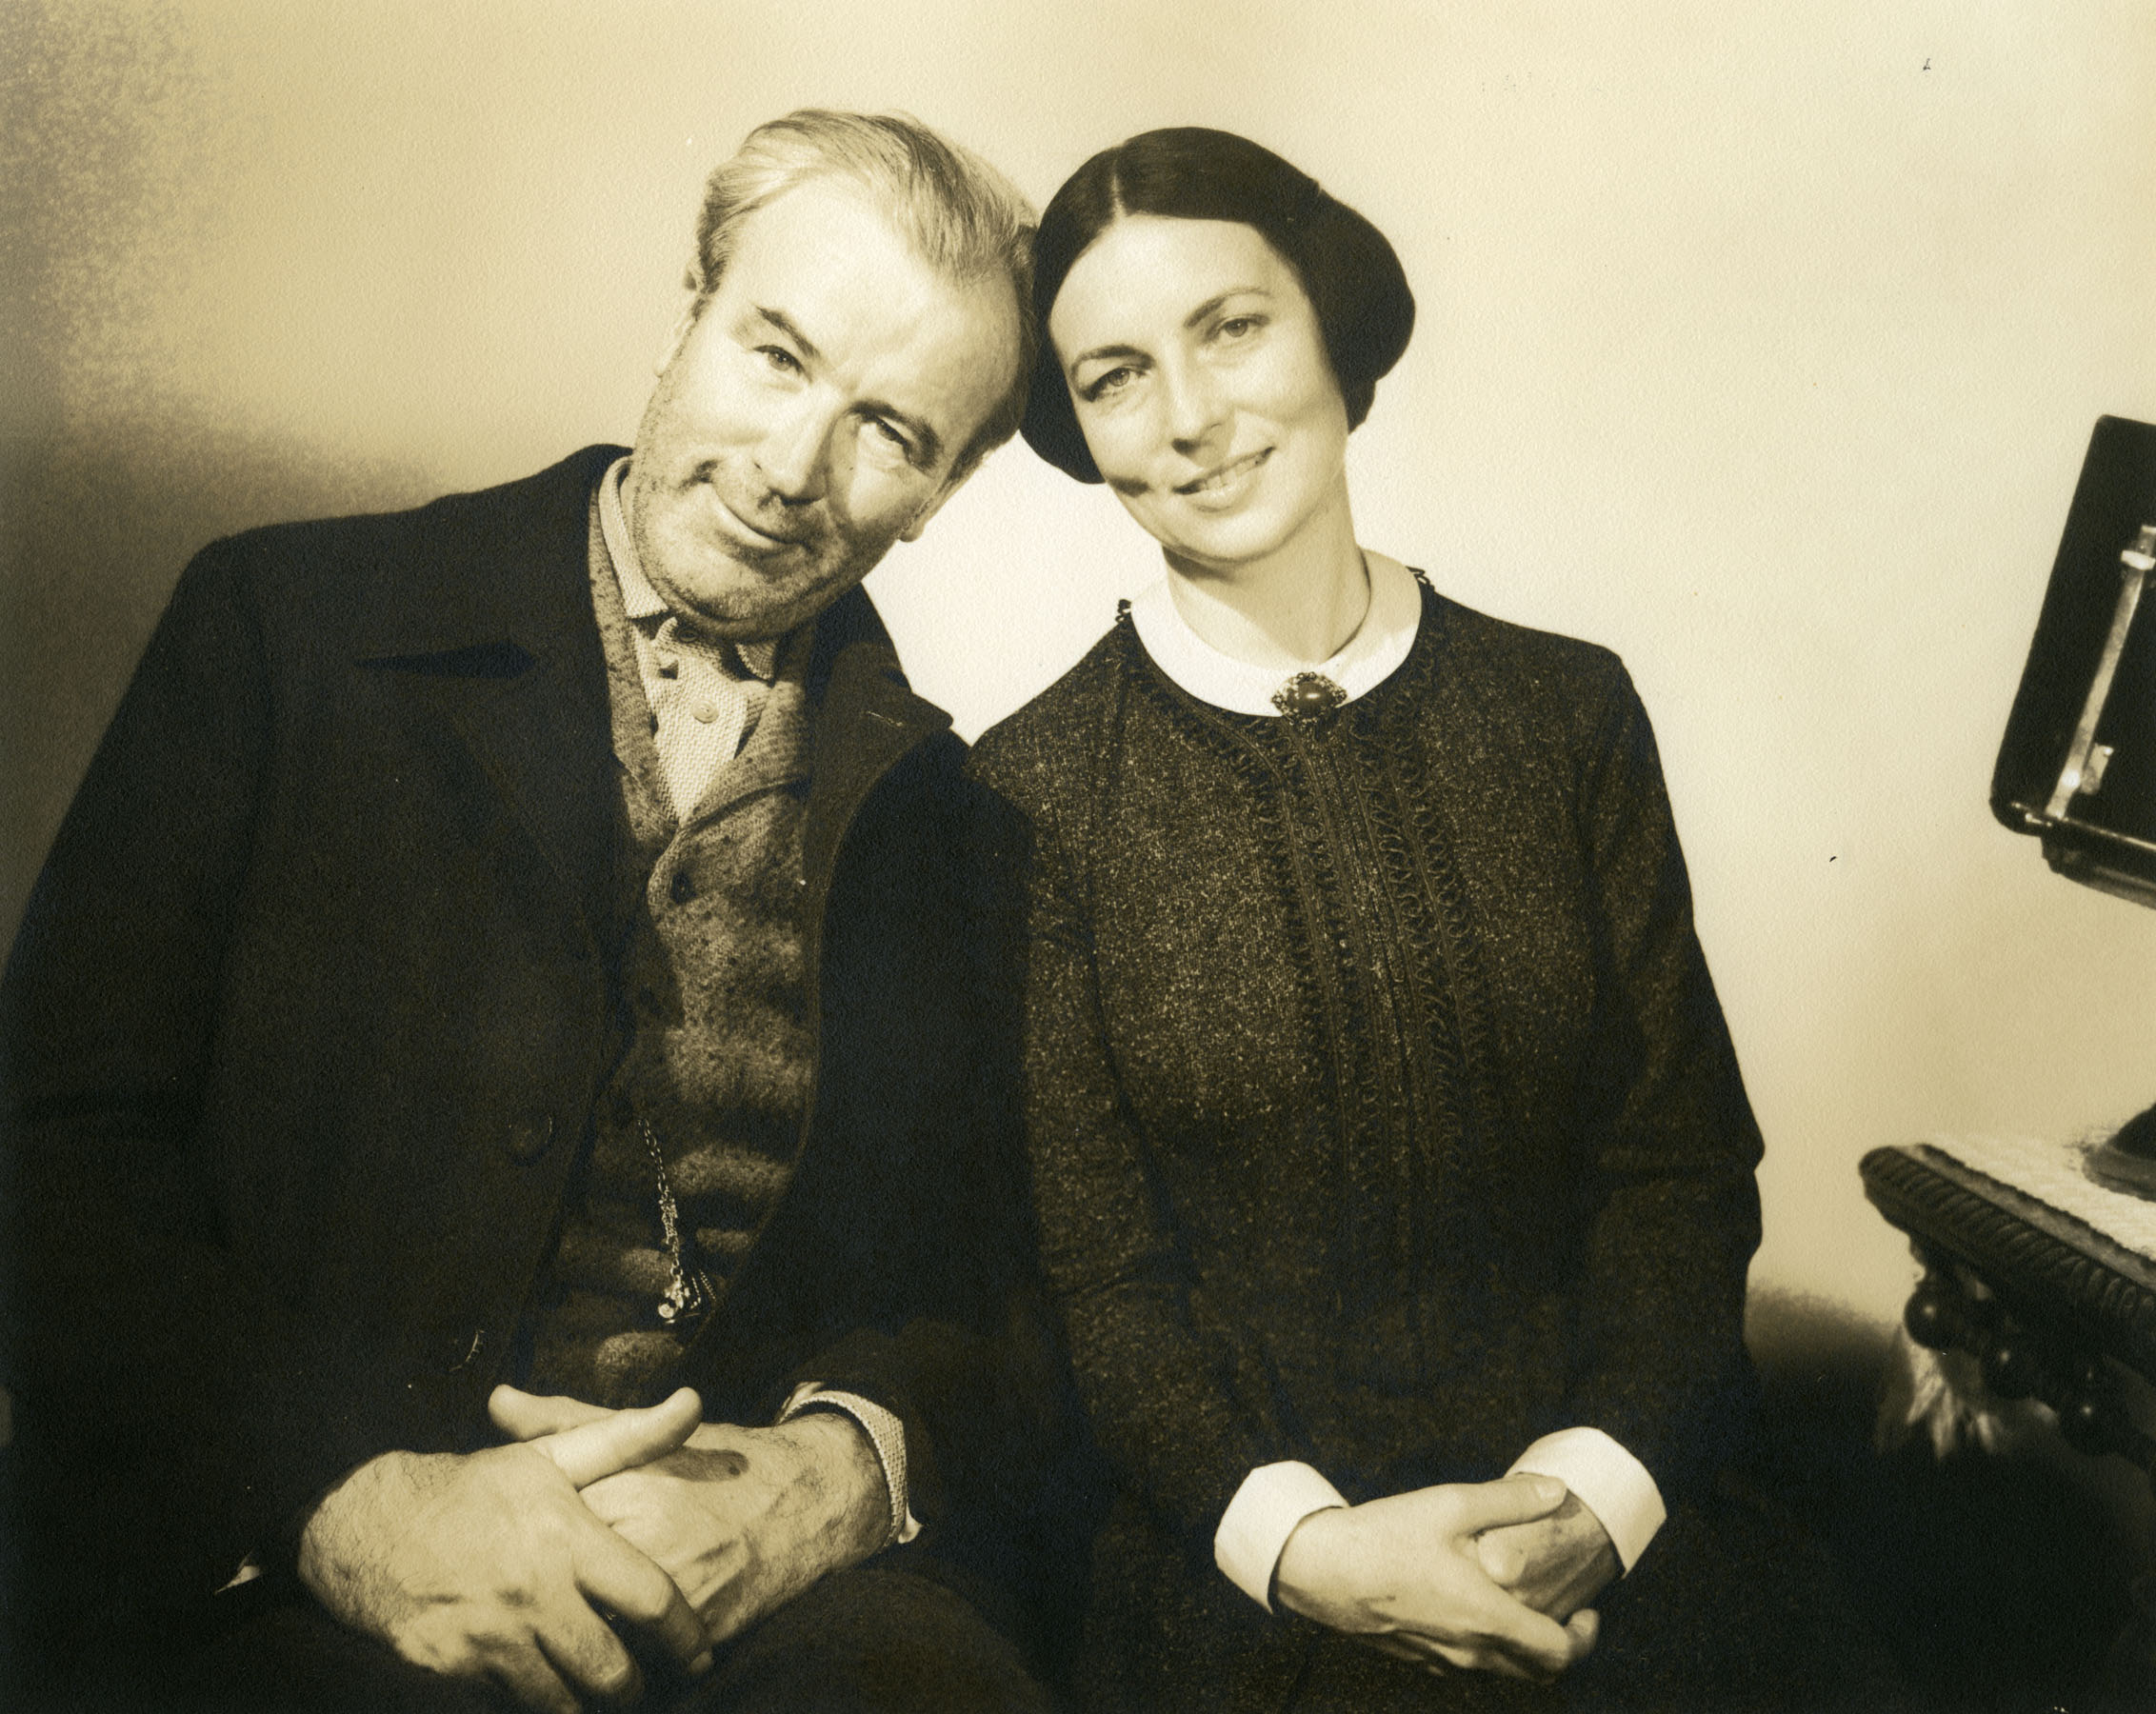 Harry Shannon (Kane's father, left) and Agnes Moorehead (Mary Kane, right) in a portrait that may have originally been created for set decoration.